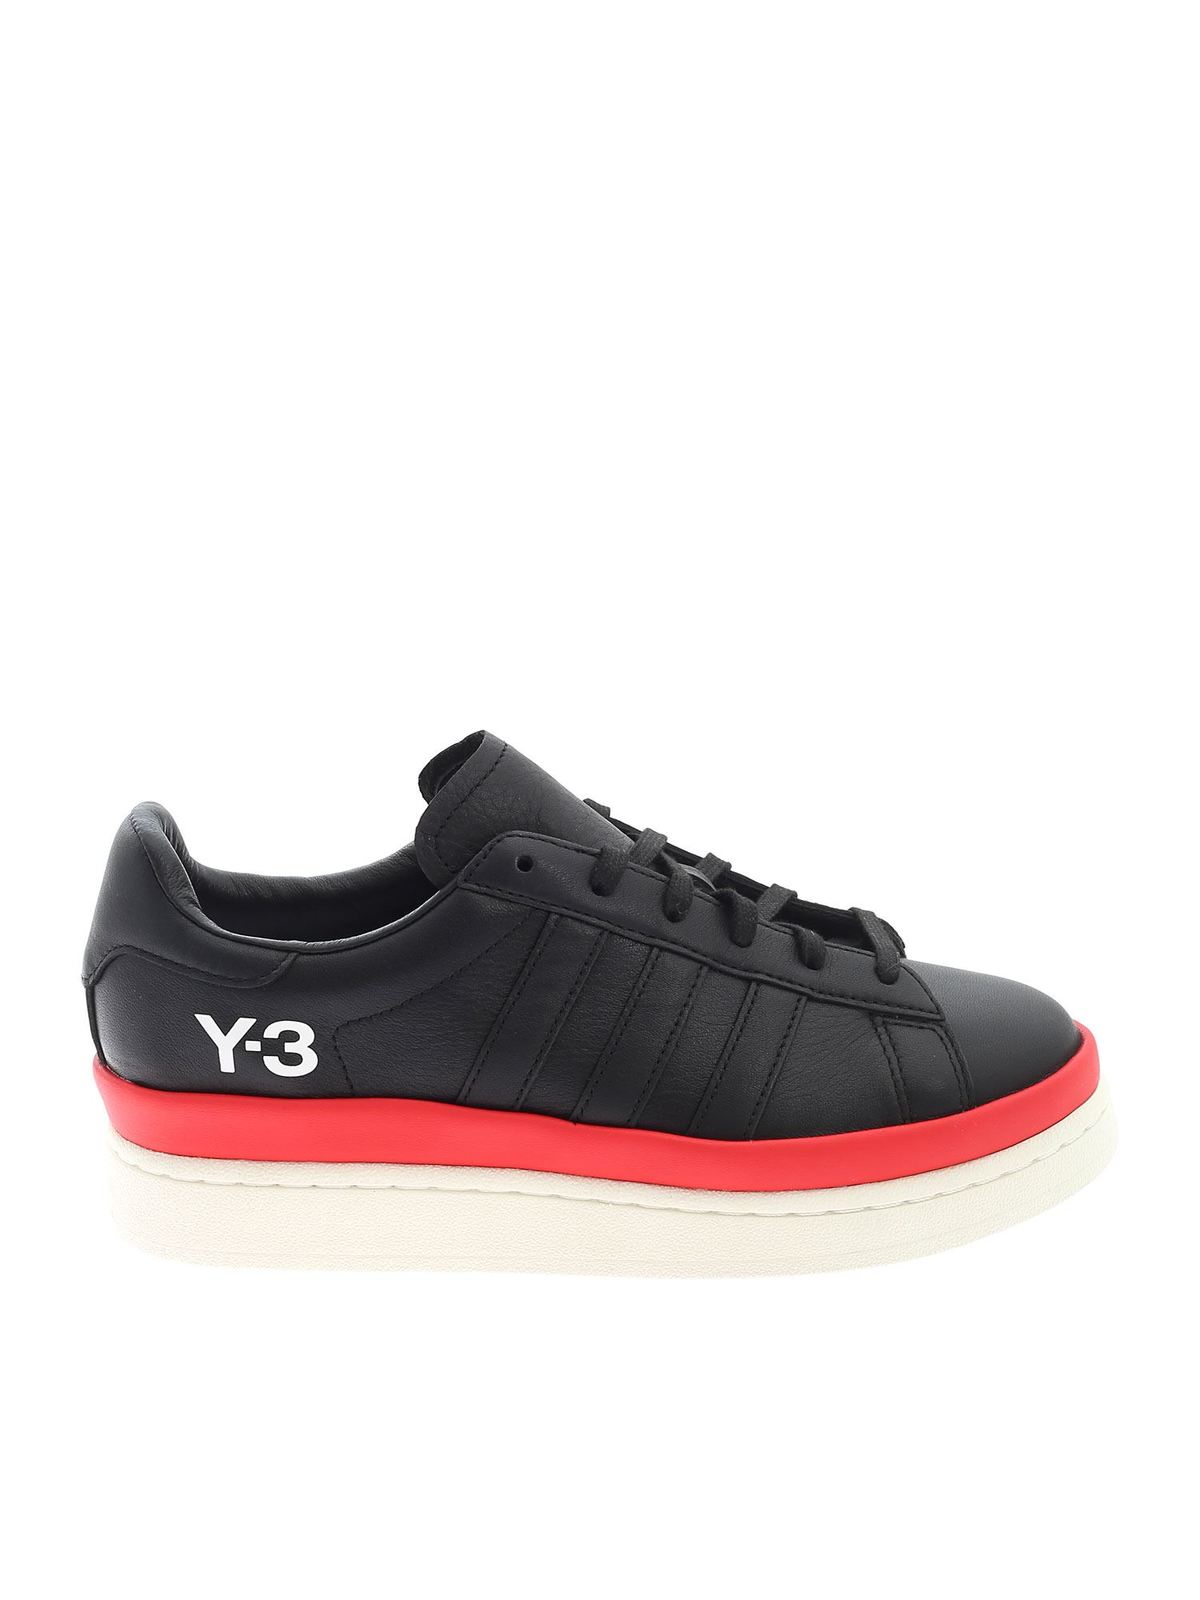 Trainers Y-3 - Sneakers Hicho in black - FZ4338 | Shop online at iKRIX